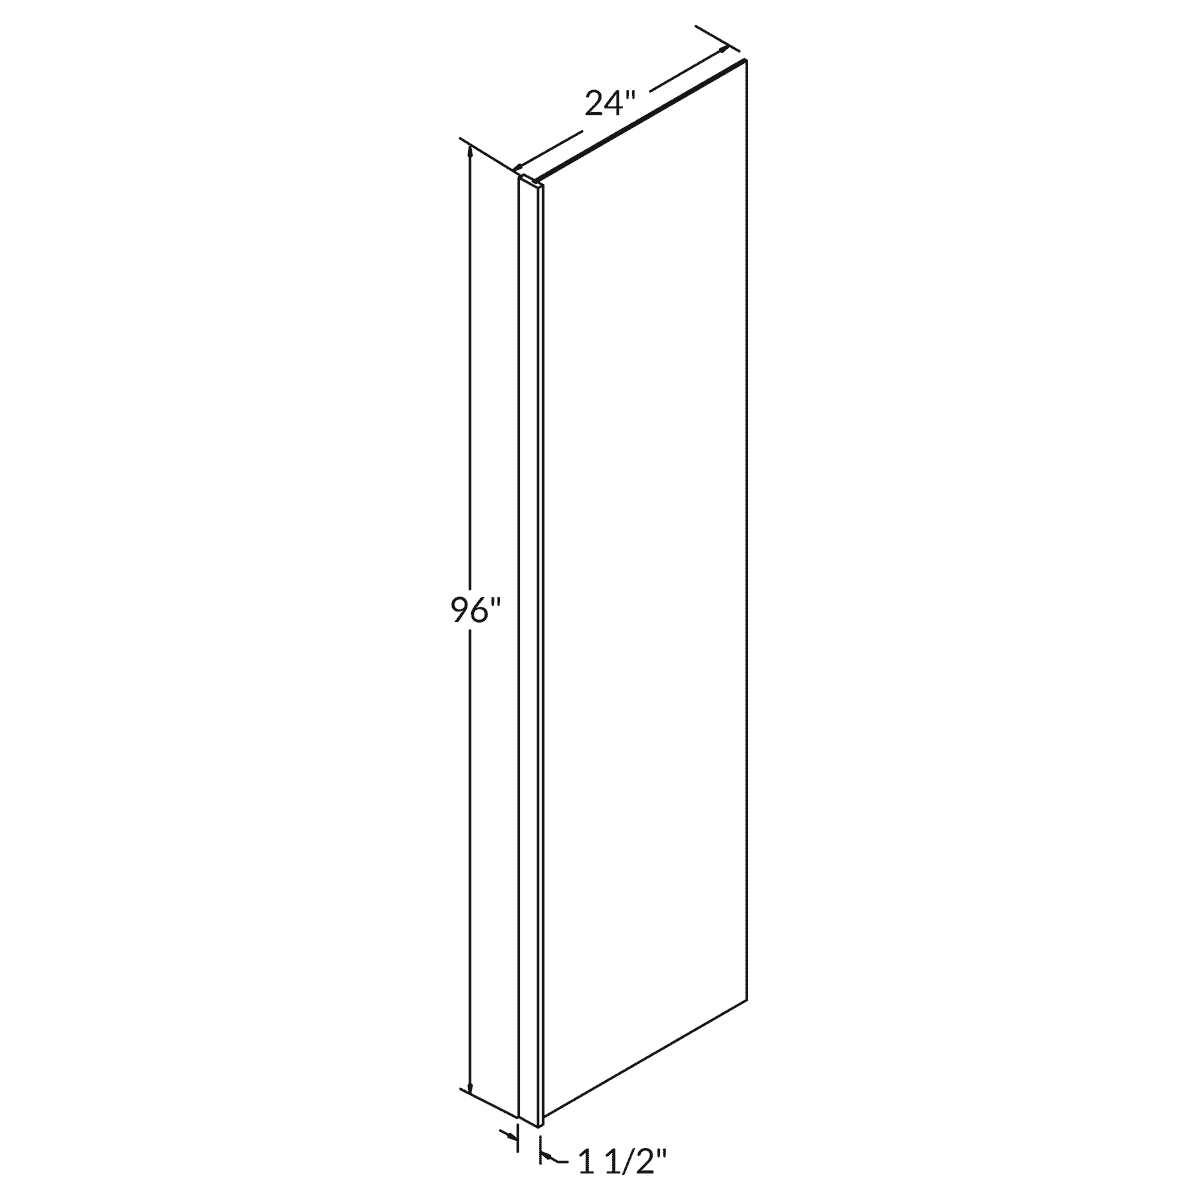 96 H X 24 D End Panel With 1 1 2 Stile For All-Wood Shaker White Cabinetry